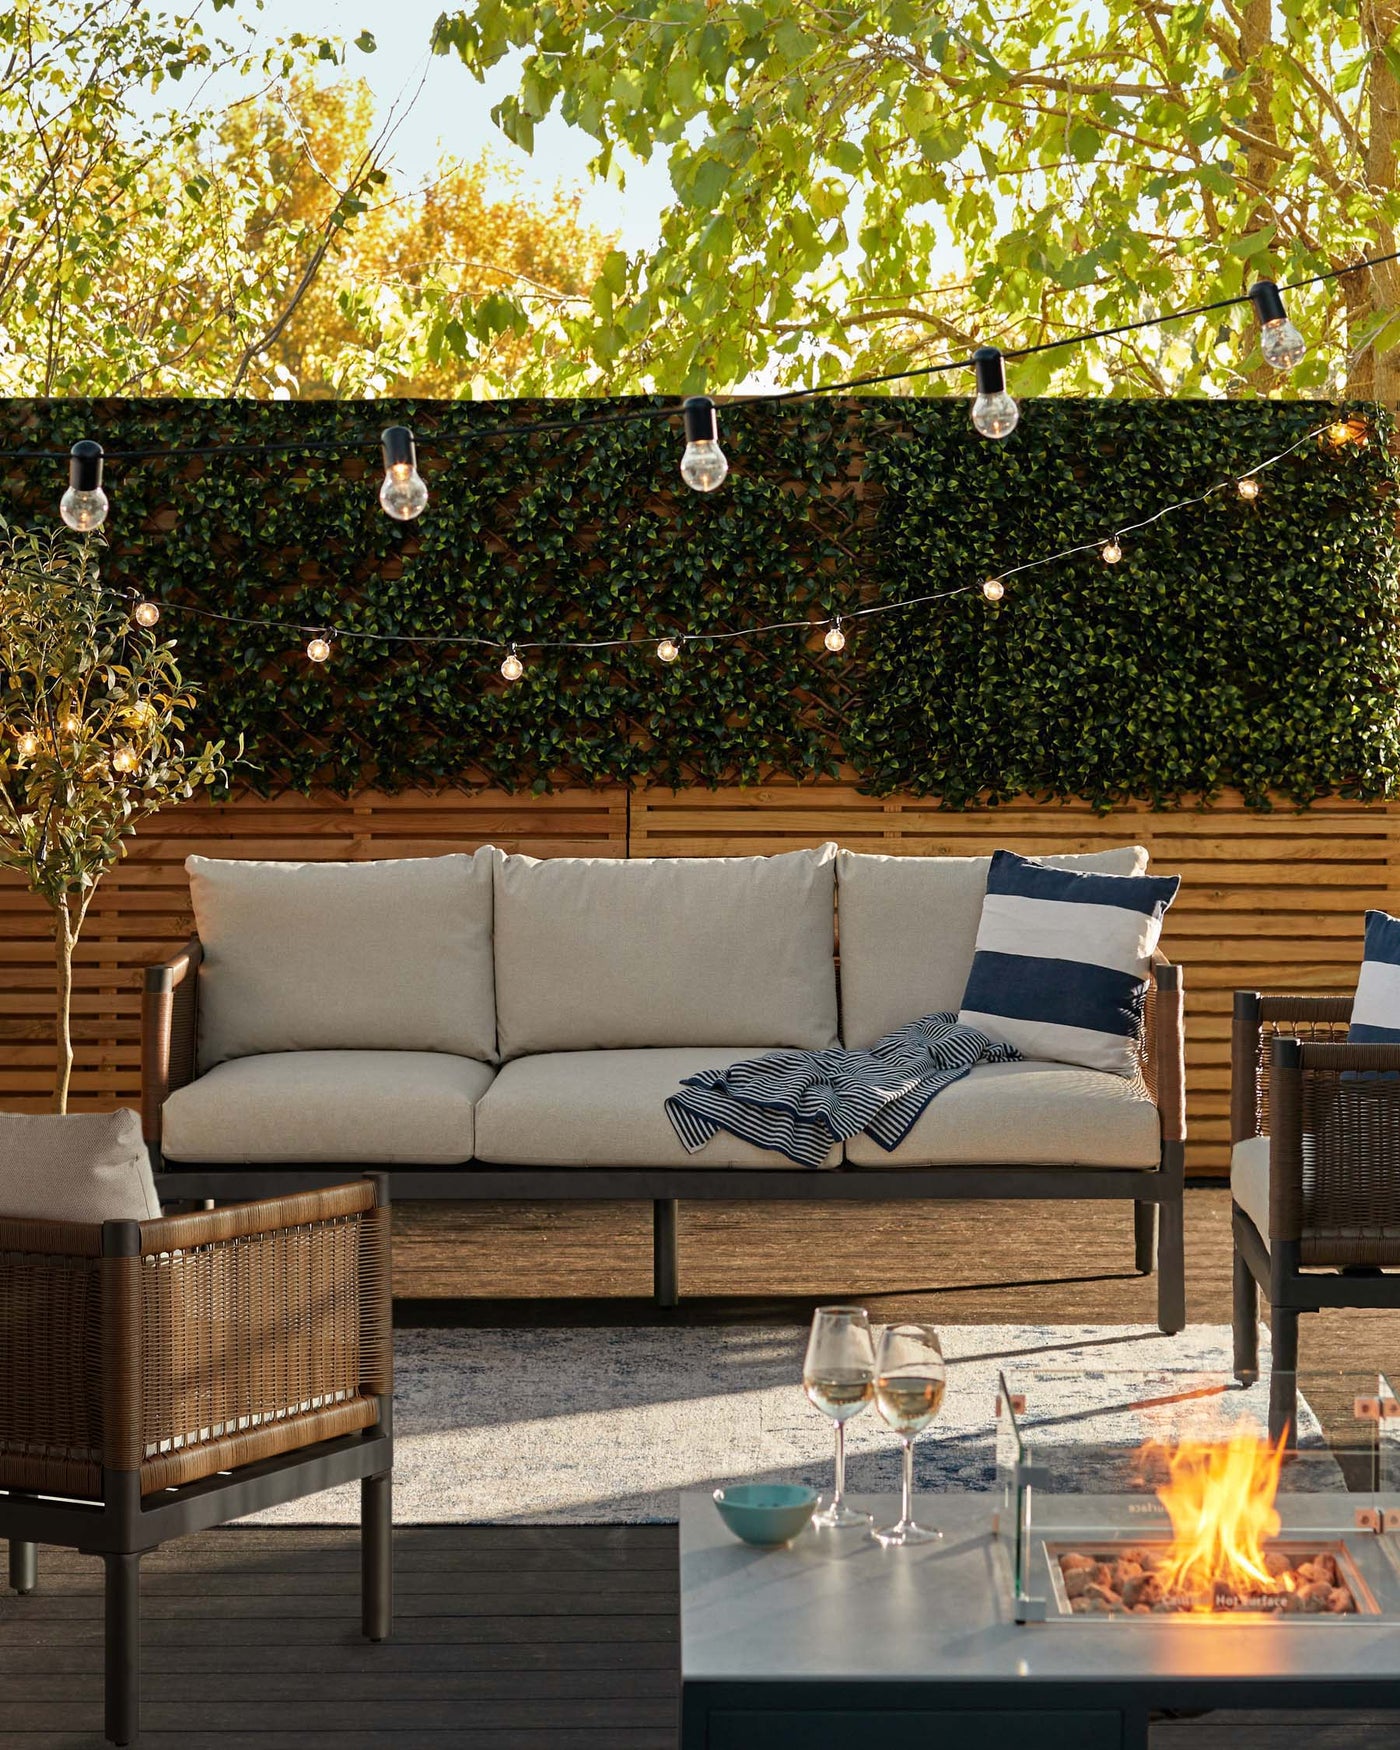 Contemporary outdoor furniture set featuring a large three-seater sofa with beige cushions and wooden armrests, a single armchair with matching design and cushions, and a rectangular coffee table with a dark surface and a built-in fire pit. The set is presented on a wooden deck with decorative string lights above, creating an inviting ambiance.